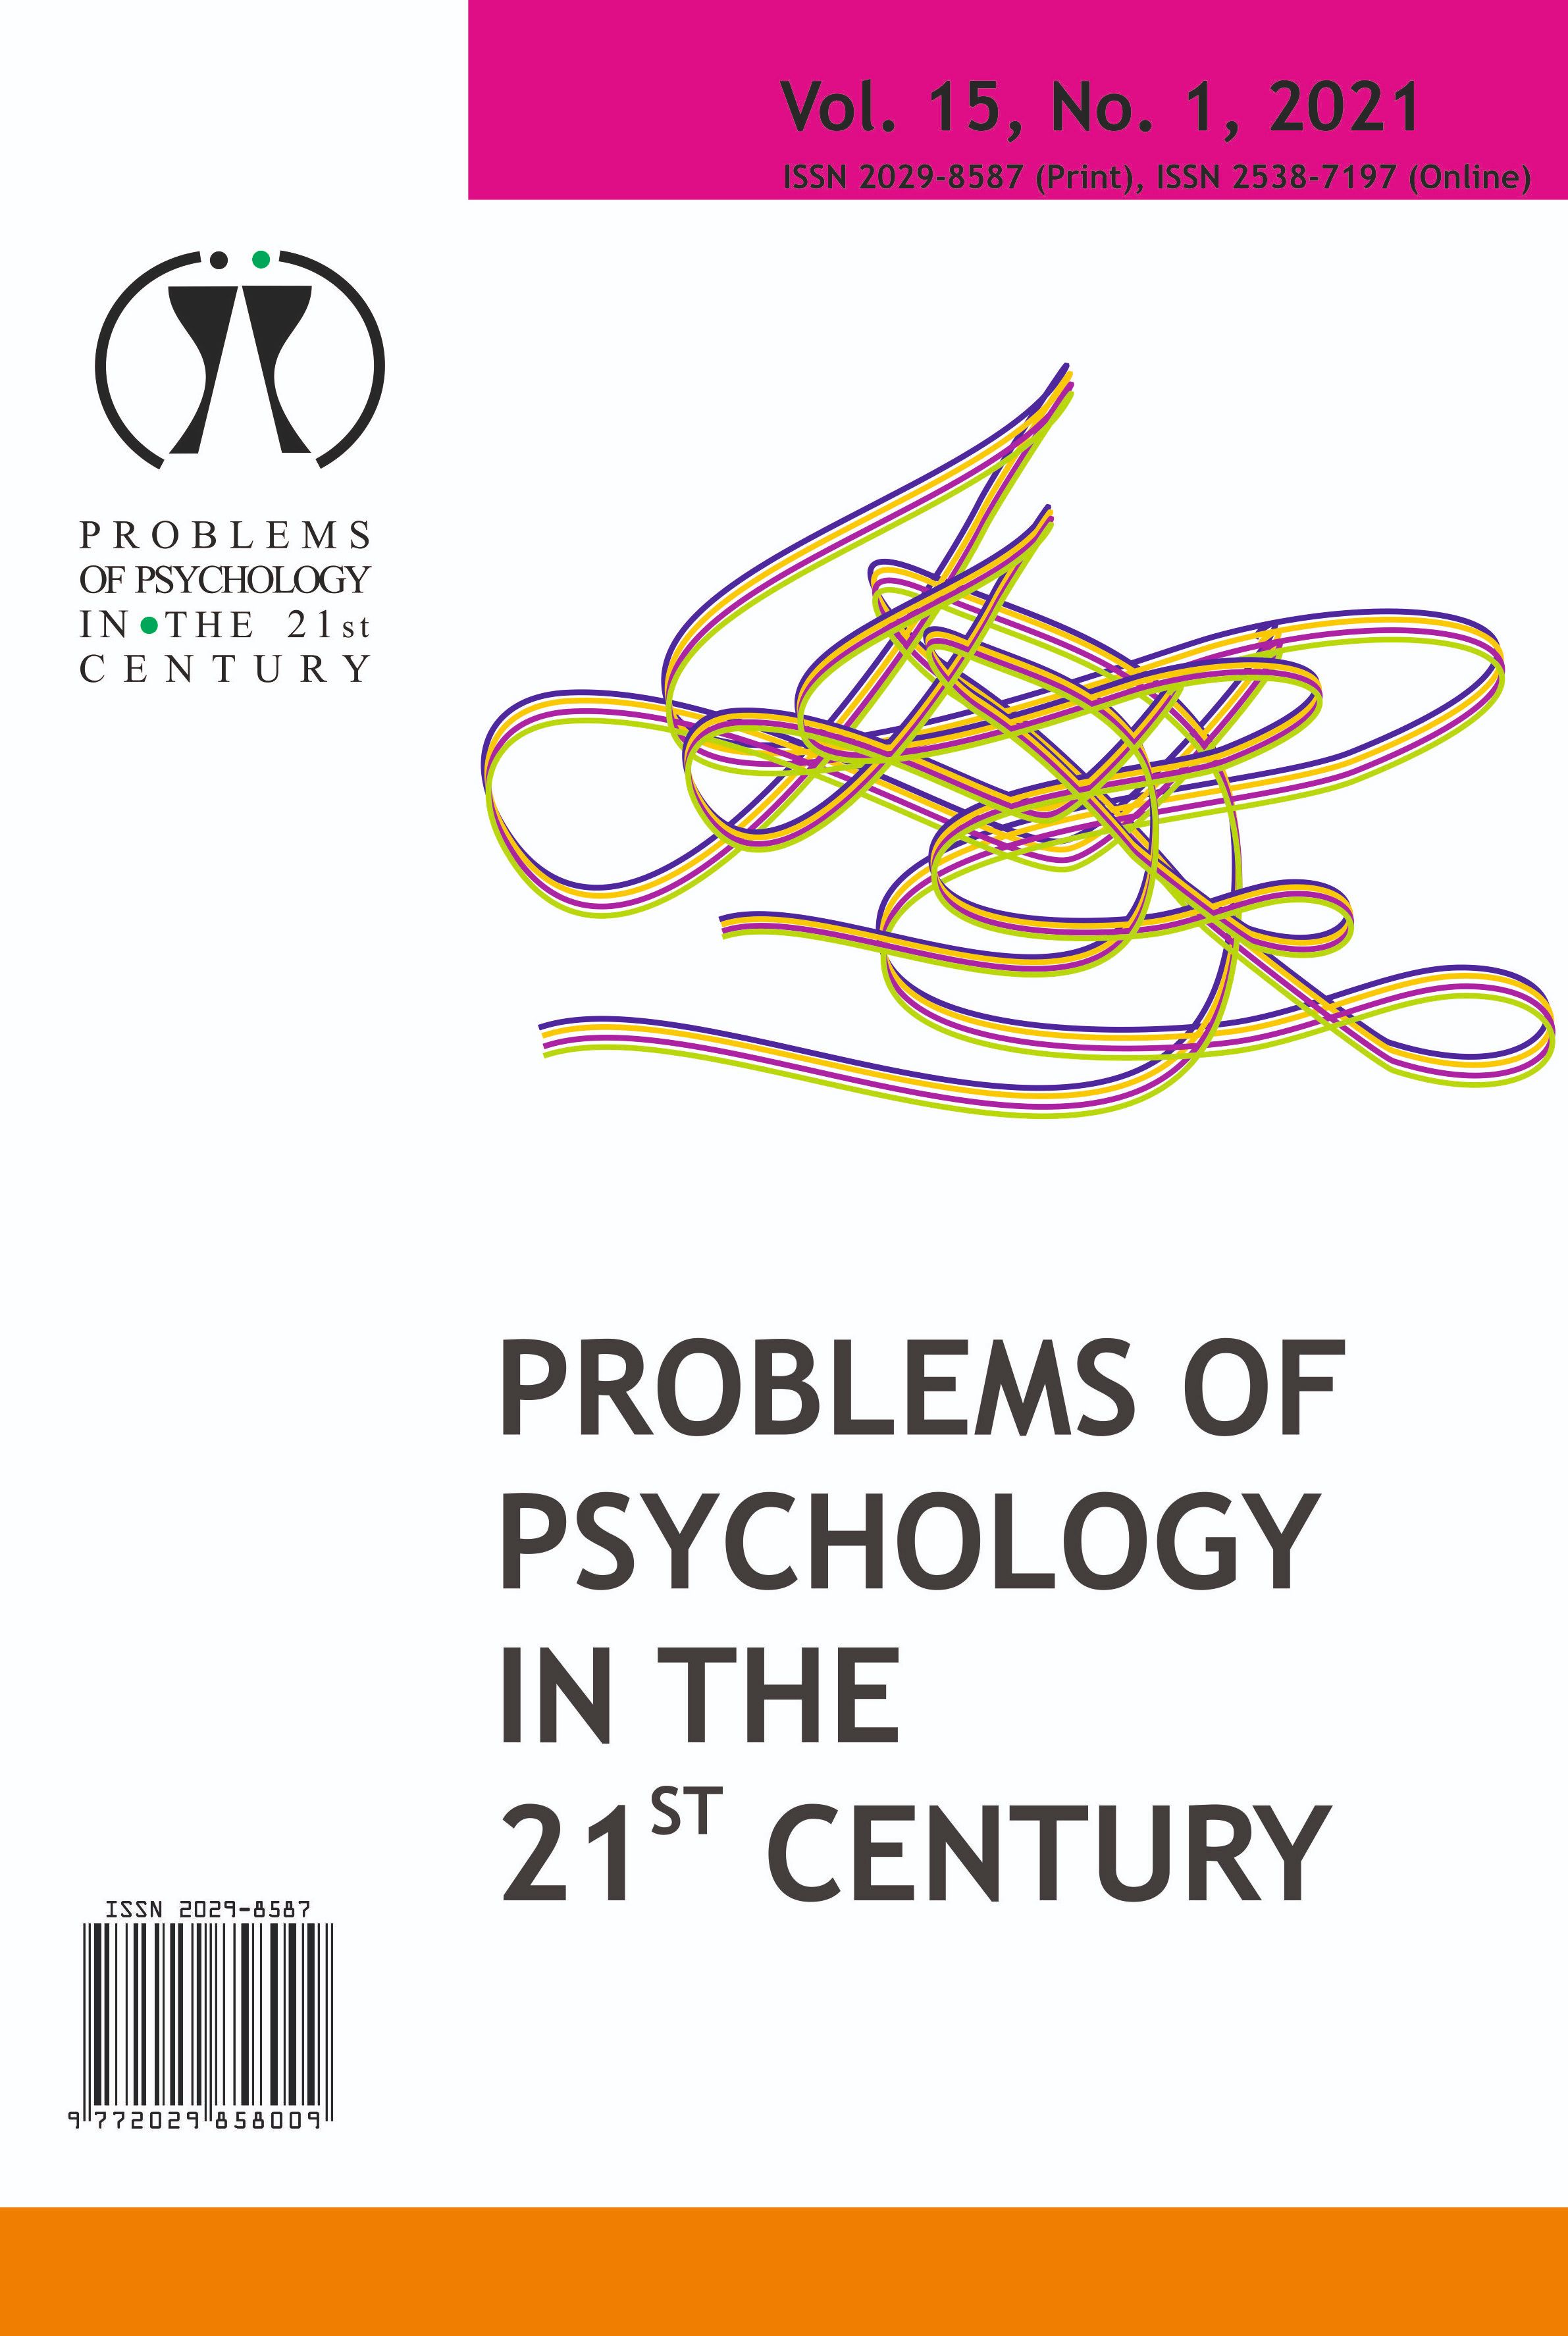 PAVLIV SESSION CONTINUES: ANNIVERSARY OF SEVEN DECADES FOR PSYCHOLOGY Cover Image